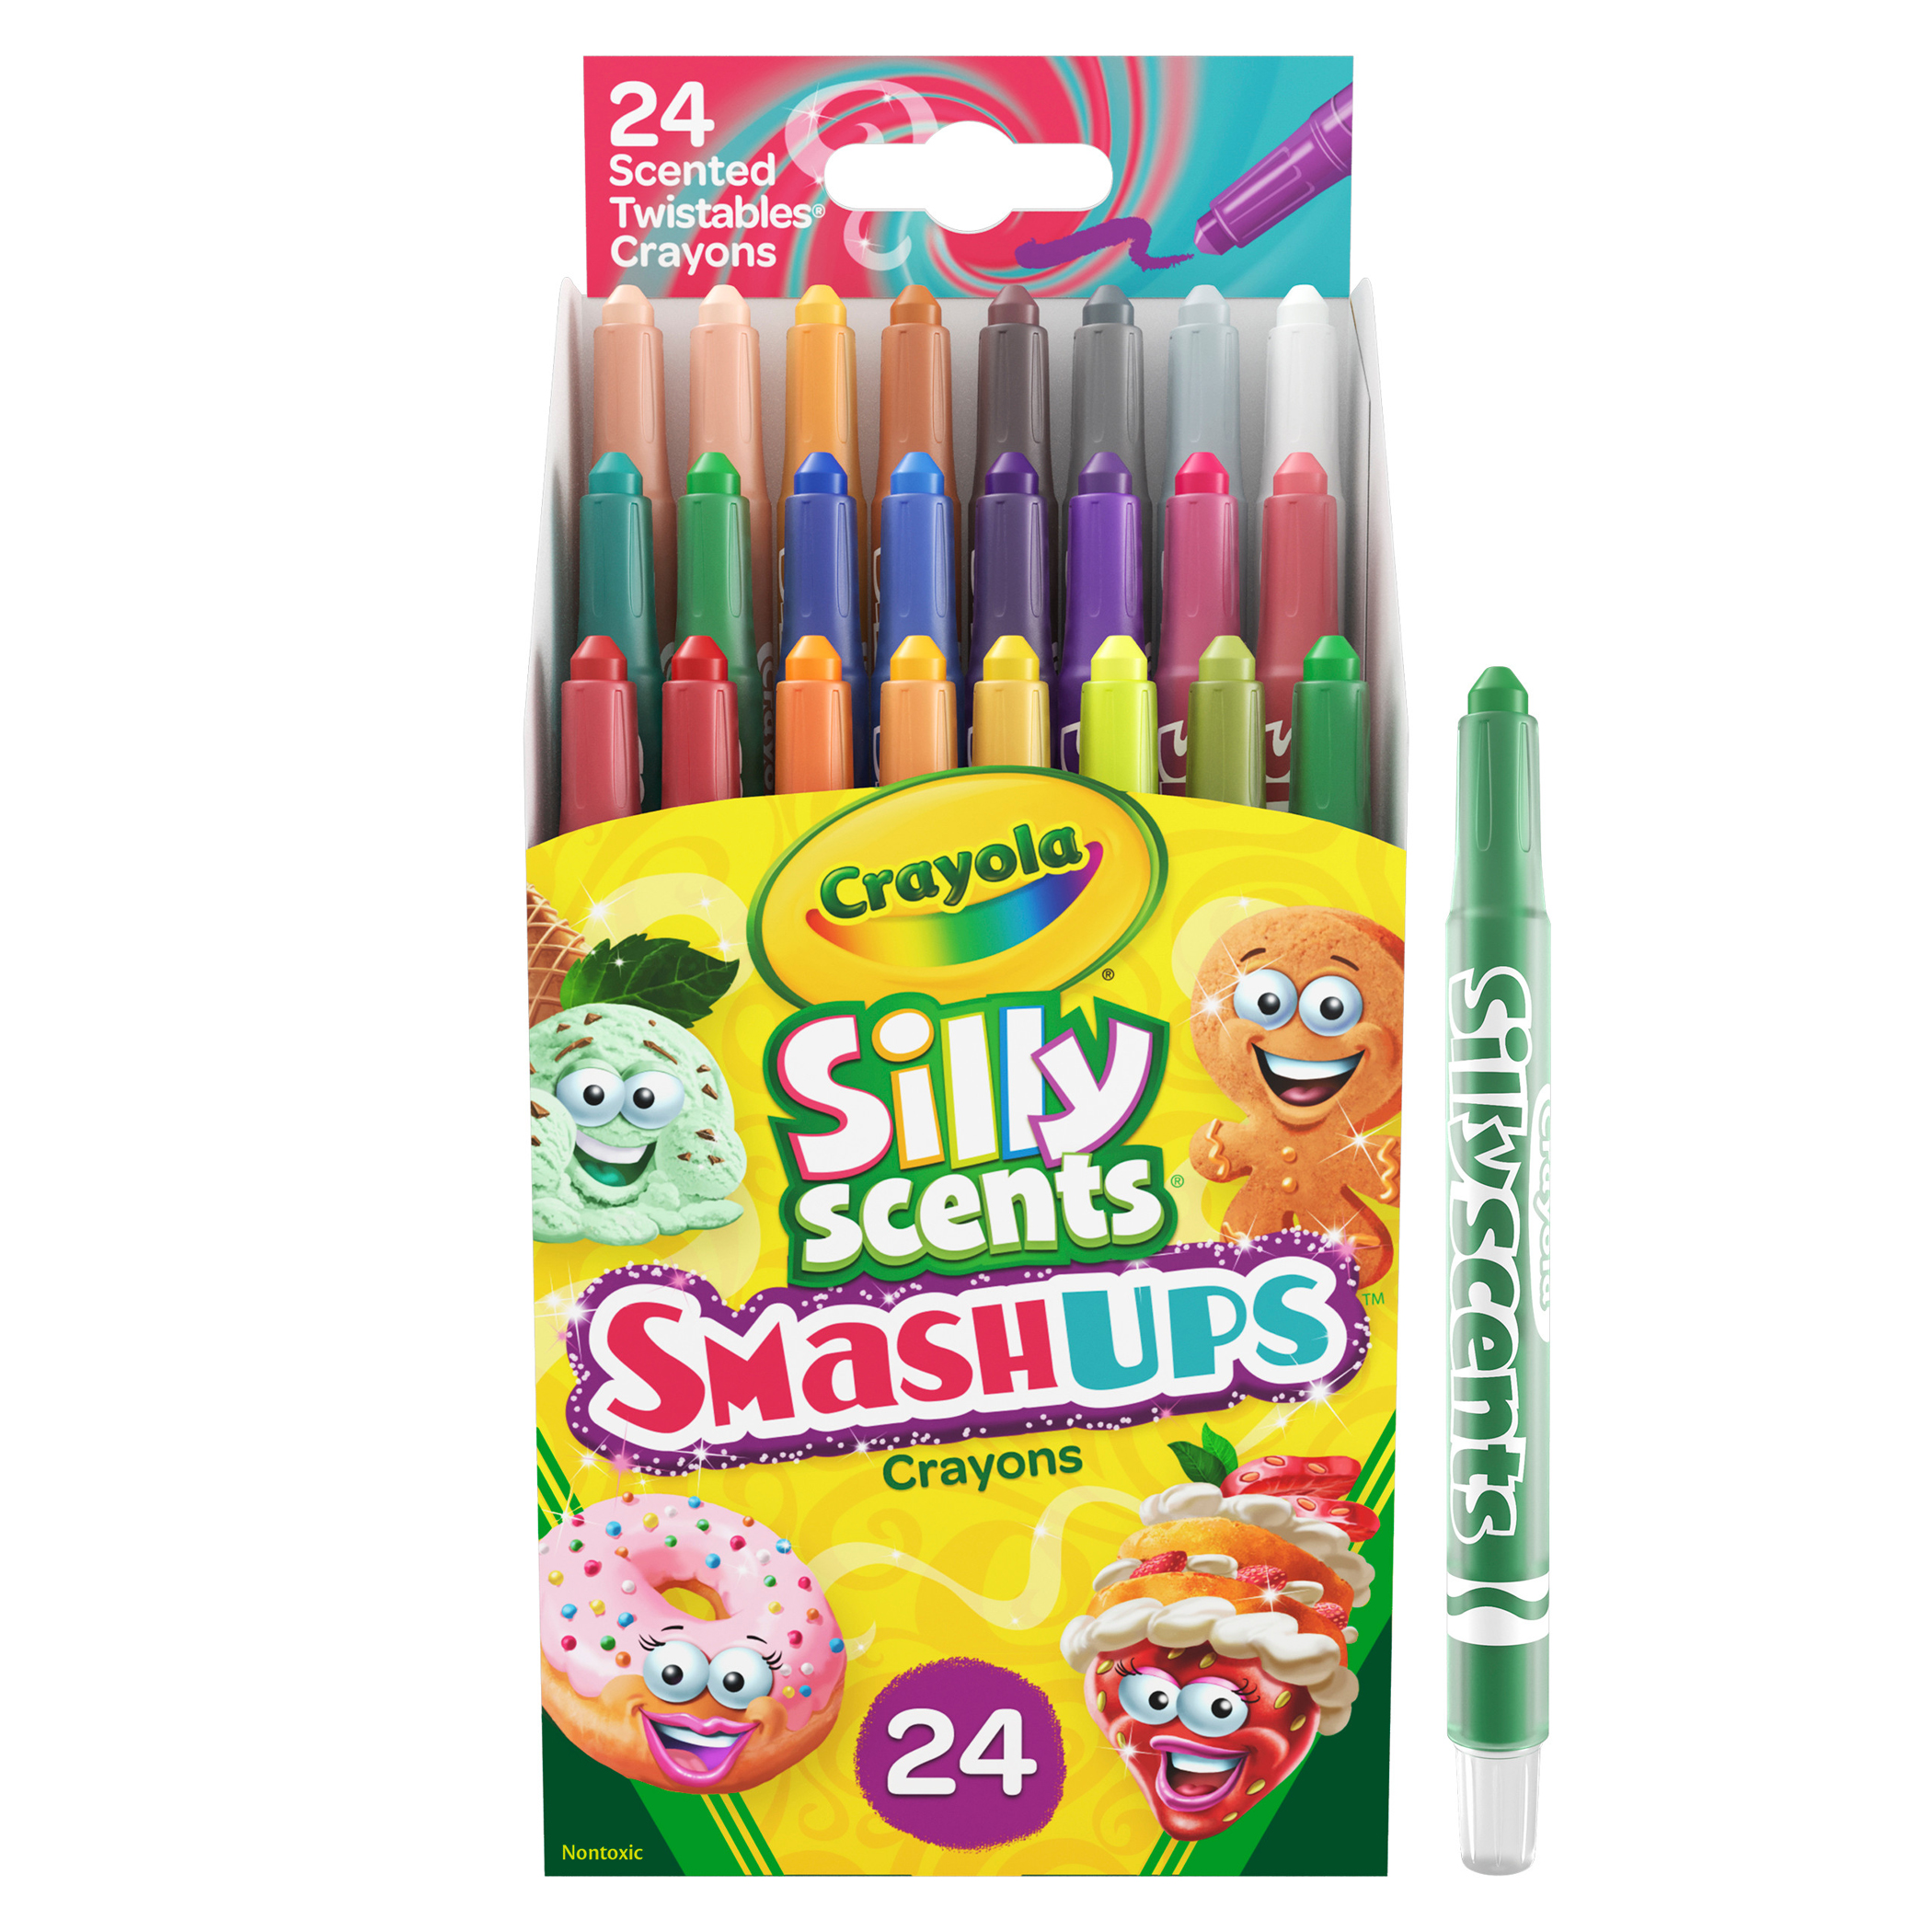 4 Pack Scented Crayons